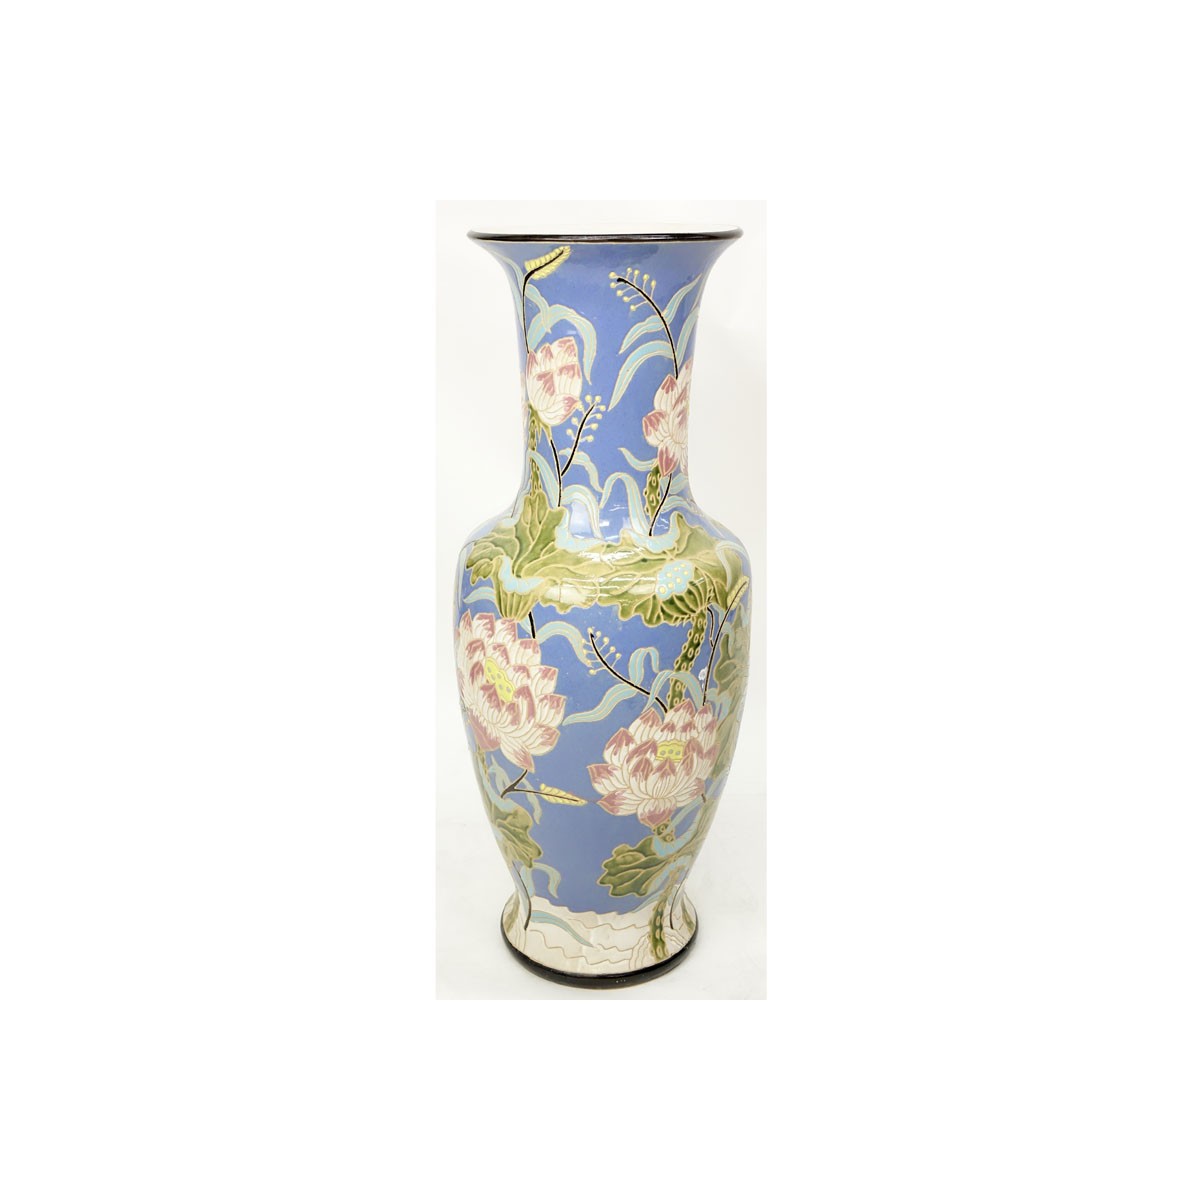 Monumental Majolica Pottery Vase. Features Asian i - Image 7 of 7